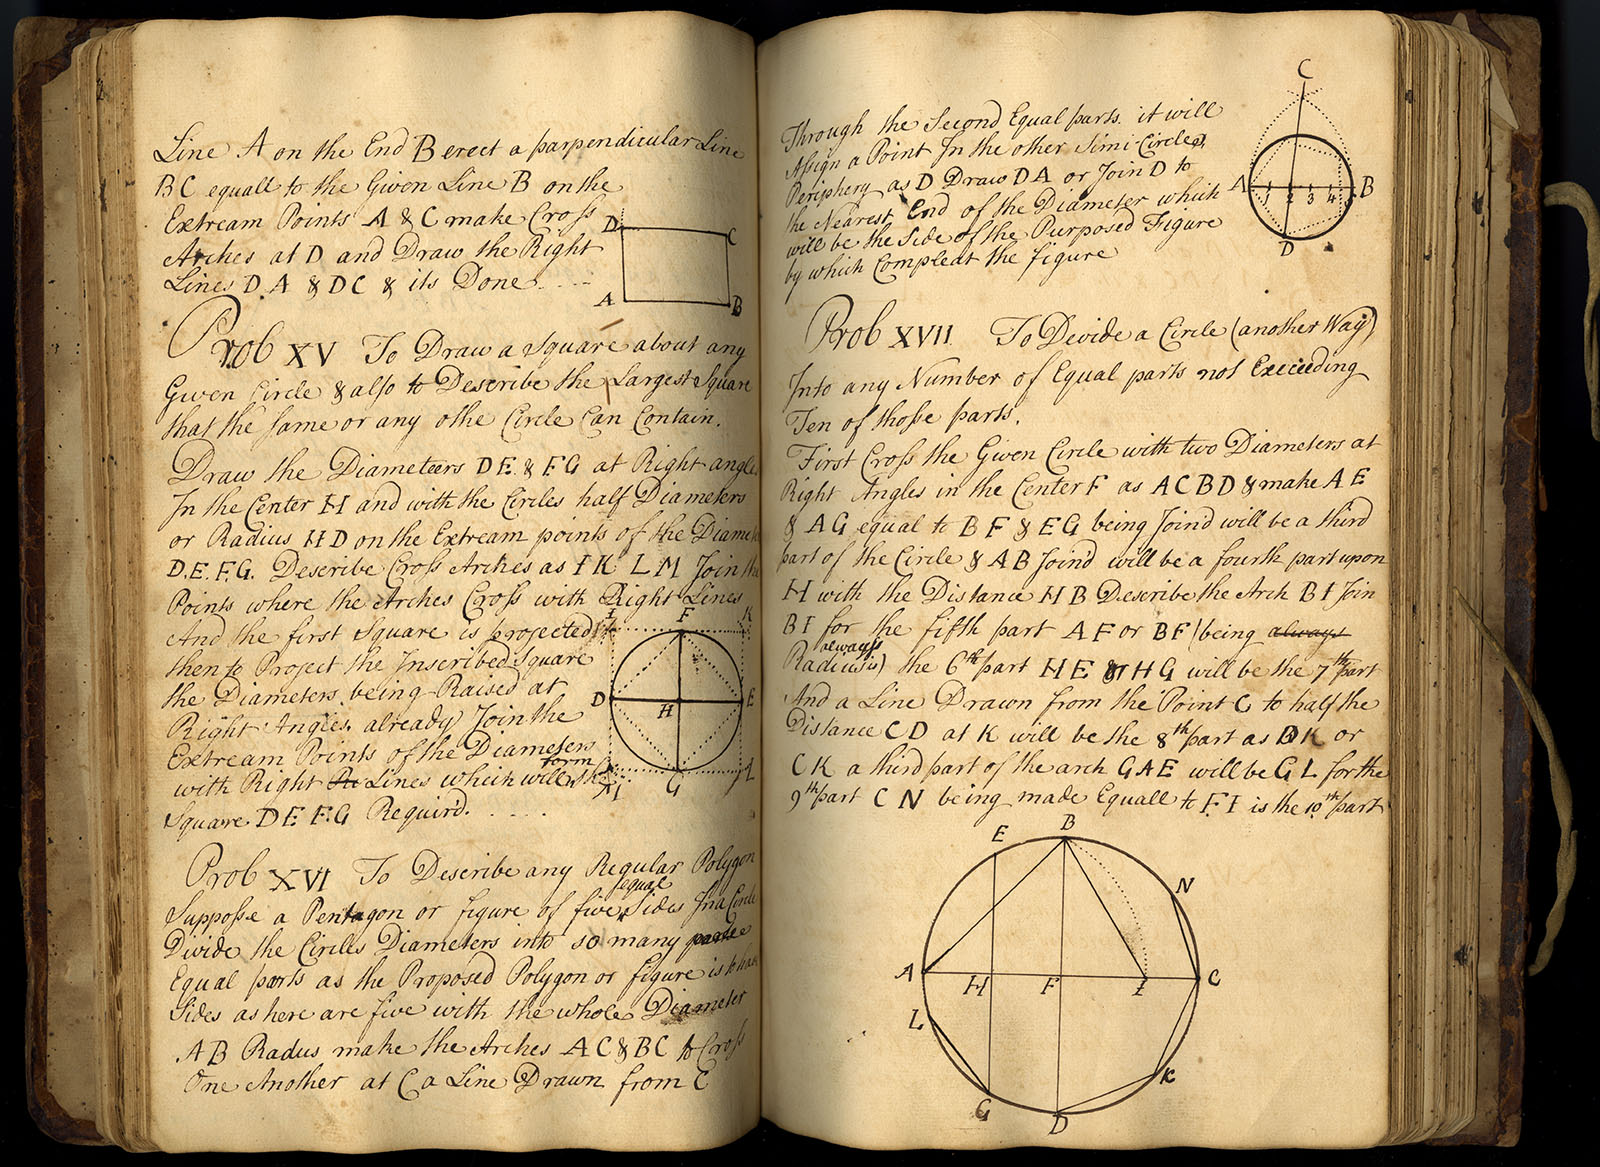 Blank book used by Richard Wistar, mid-1700s, as an exercise book and as a copybook for correspondence. Gift of Cresson Wistar.